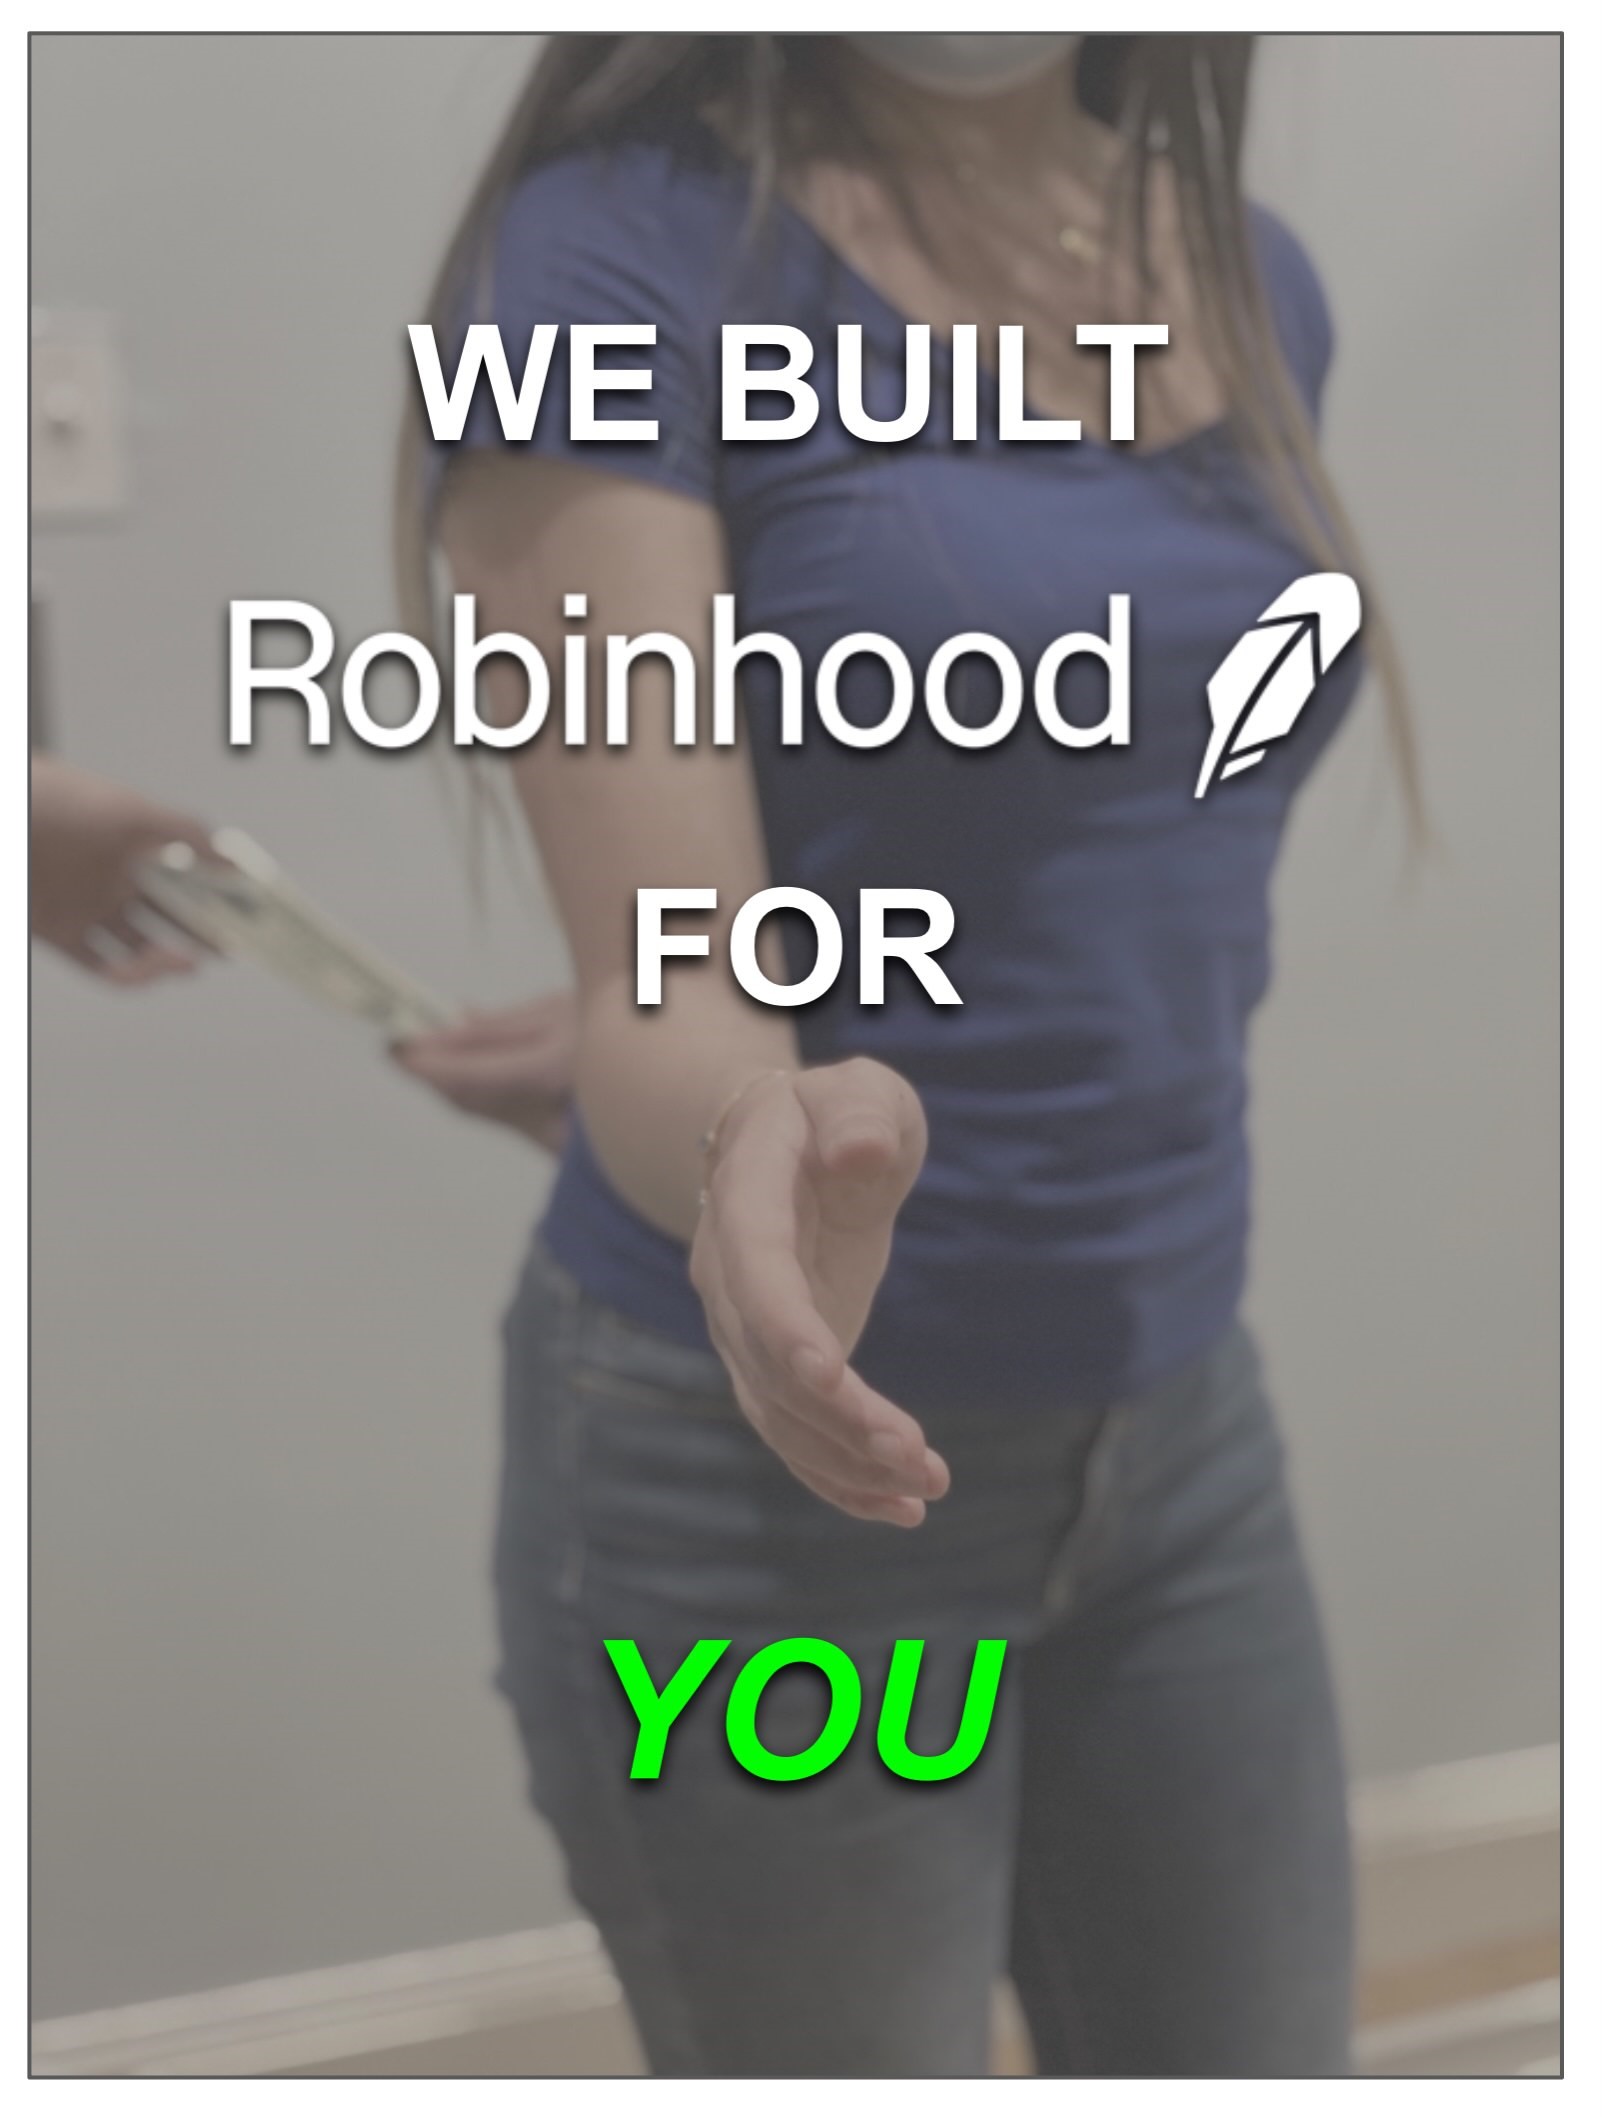 Tiffany's Subversive Ad illustrating Robinhood: includes the text "WE BUILT ROBINHOOD FOR YOU" over a photograph of someone with an outstretched hand for a handshake and another hand holding out money to another person